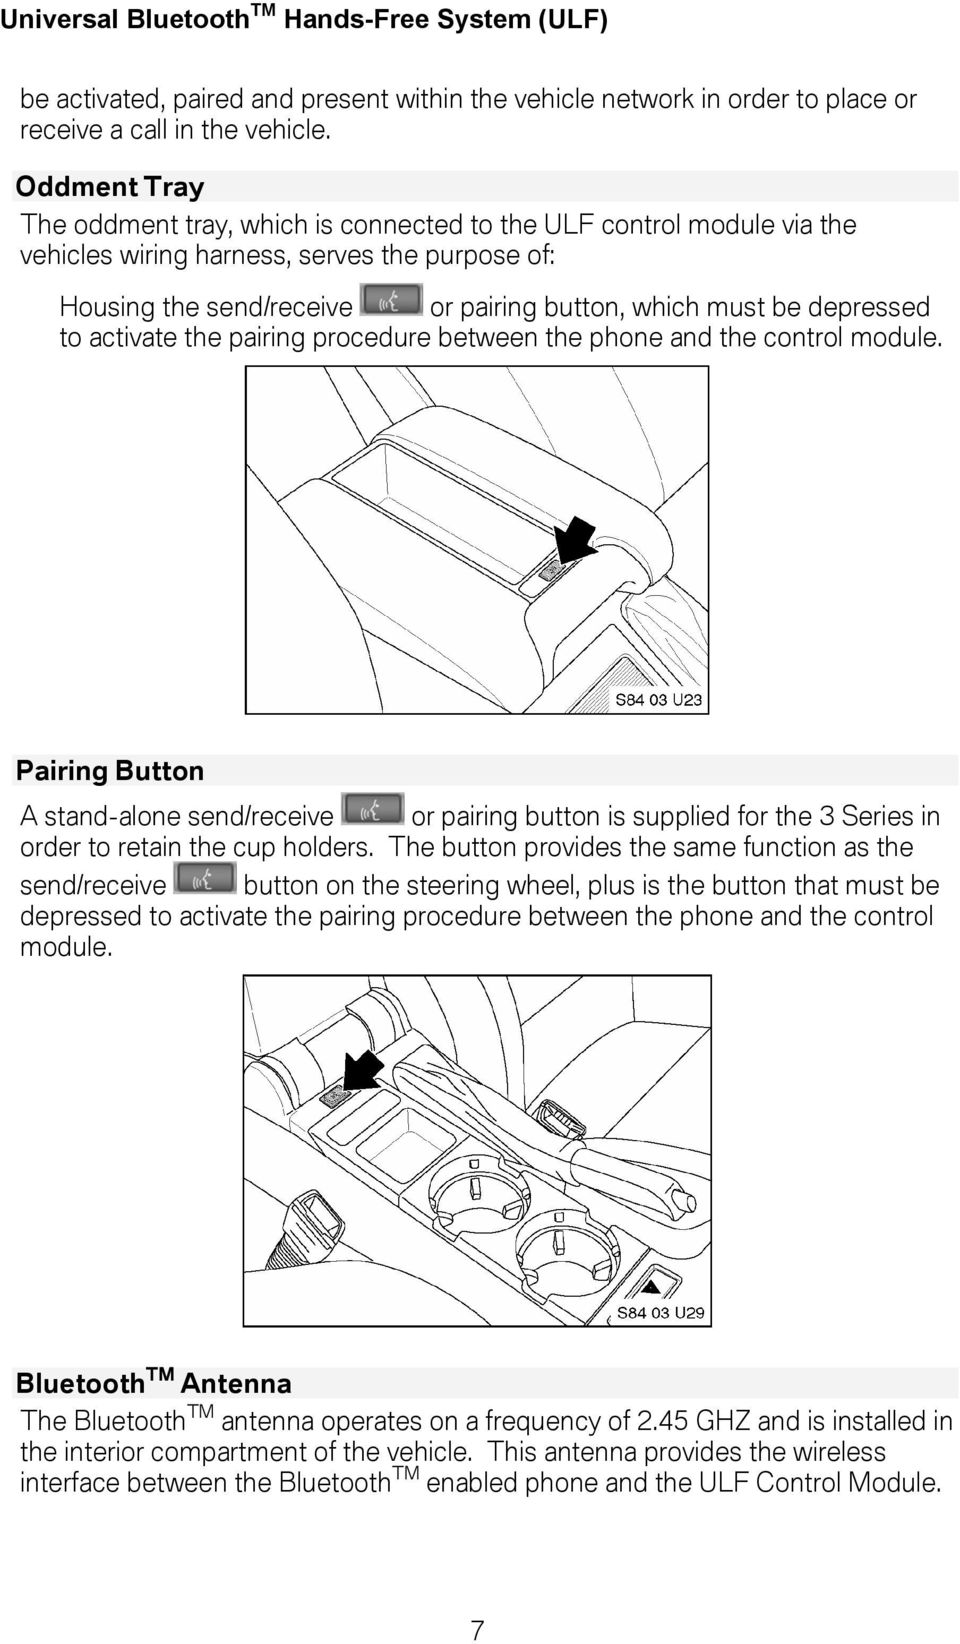 to activate the pairing procedure between the phone and the control module. Pairing Button A stand-alone send/receive or pairing button is supplied for the 3 Series in order to retain the cup holders.